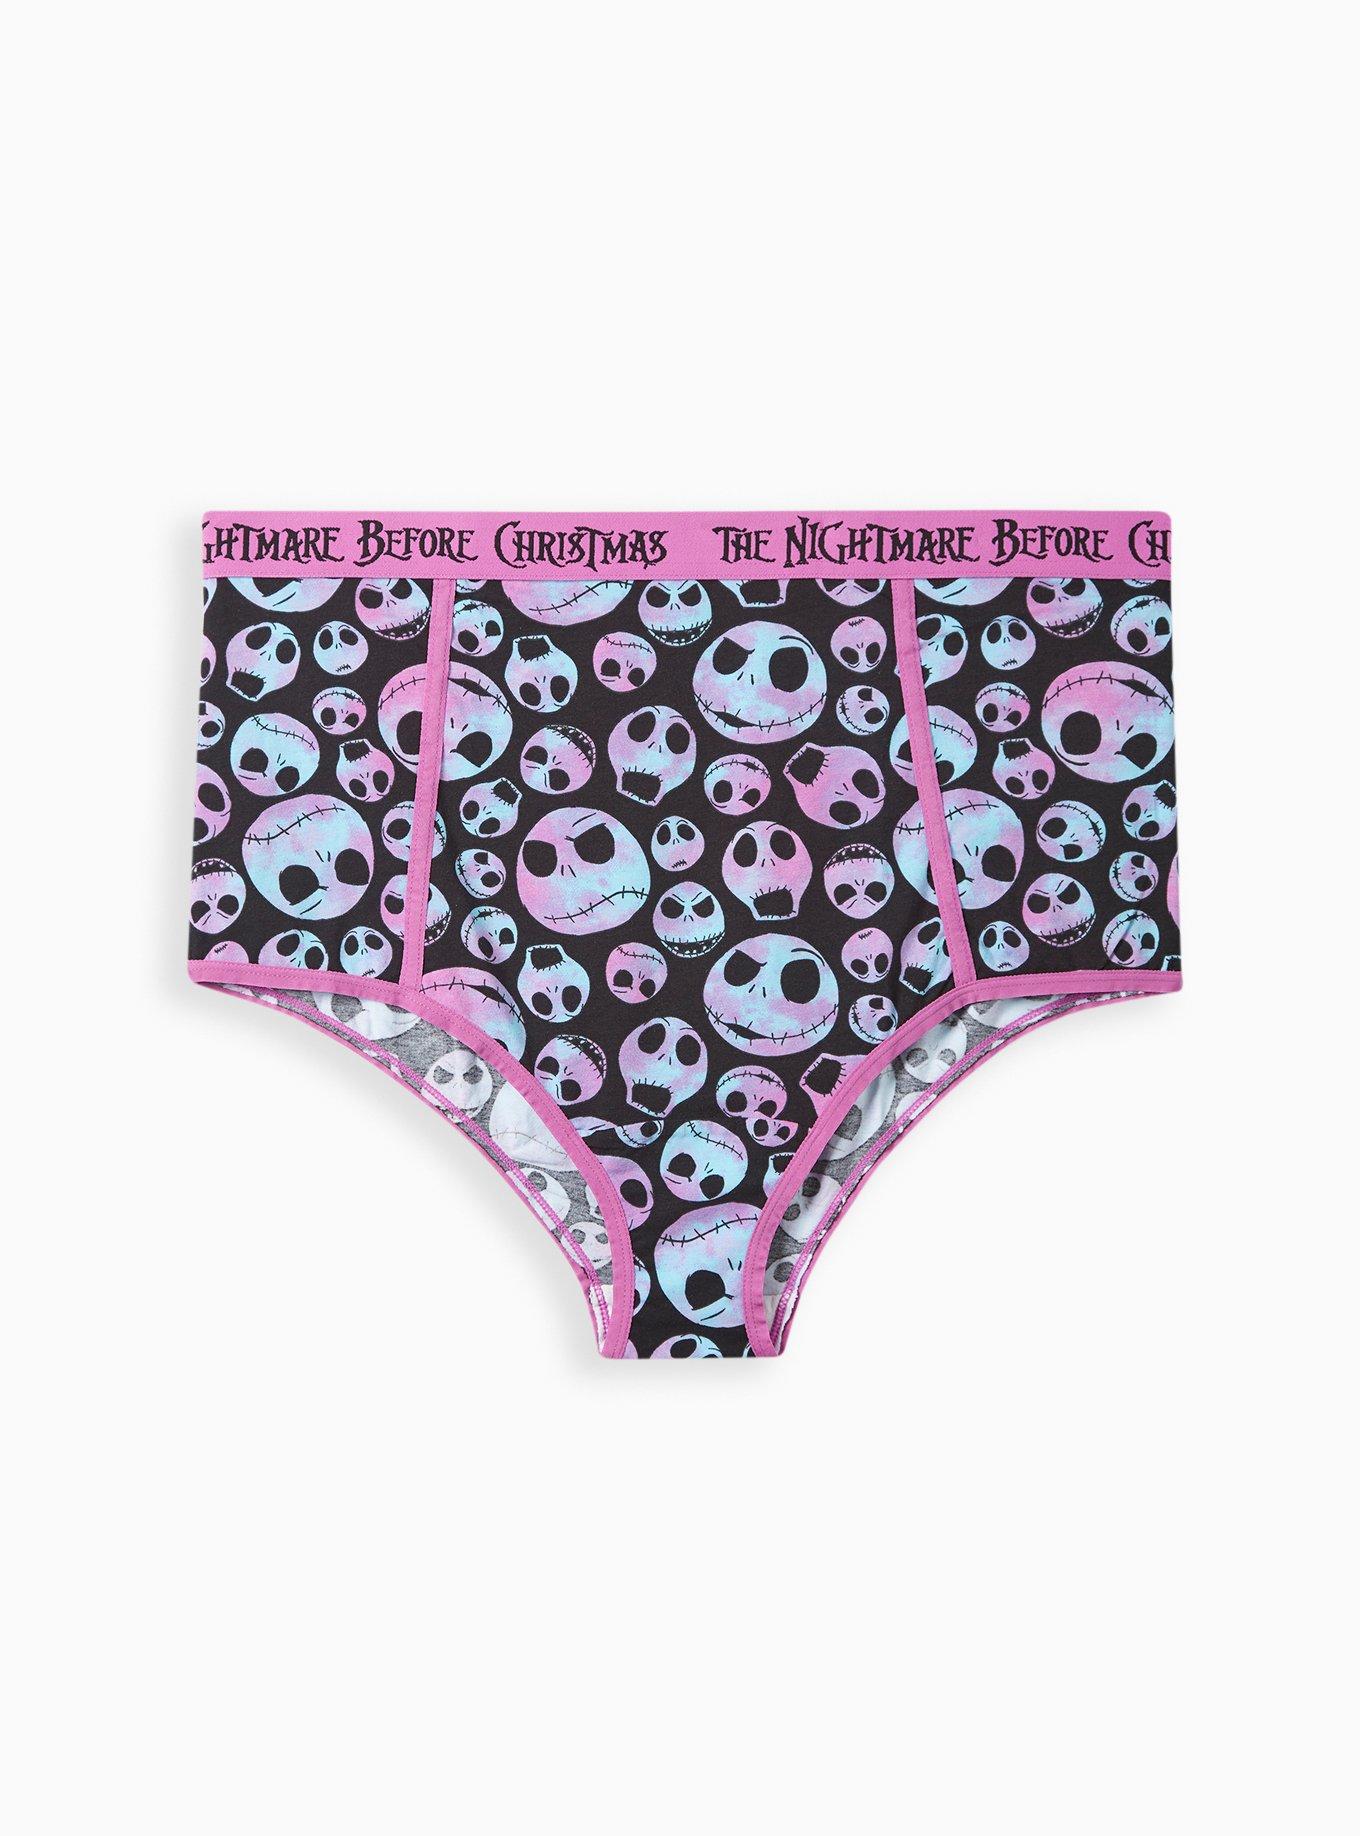 Plus Size - The Nightmare Before Christmas High Waist Panty - Cotton ...